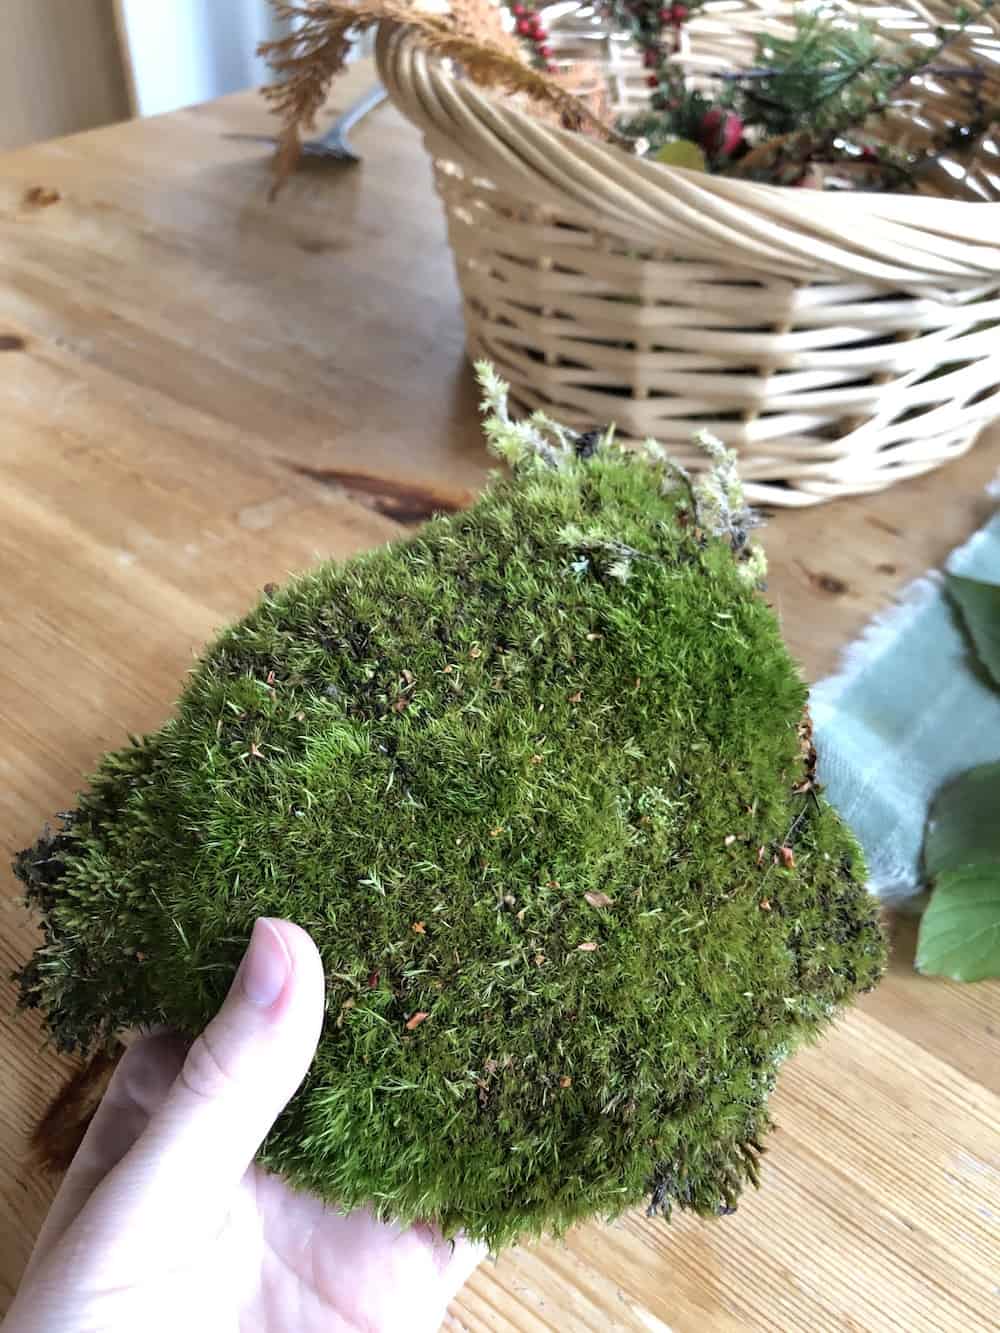 Piece of Sheet Moss Collected from Yard